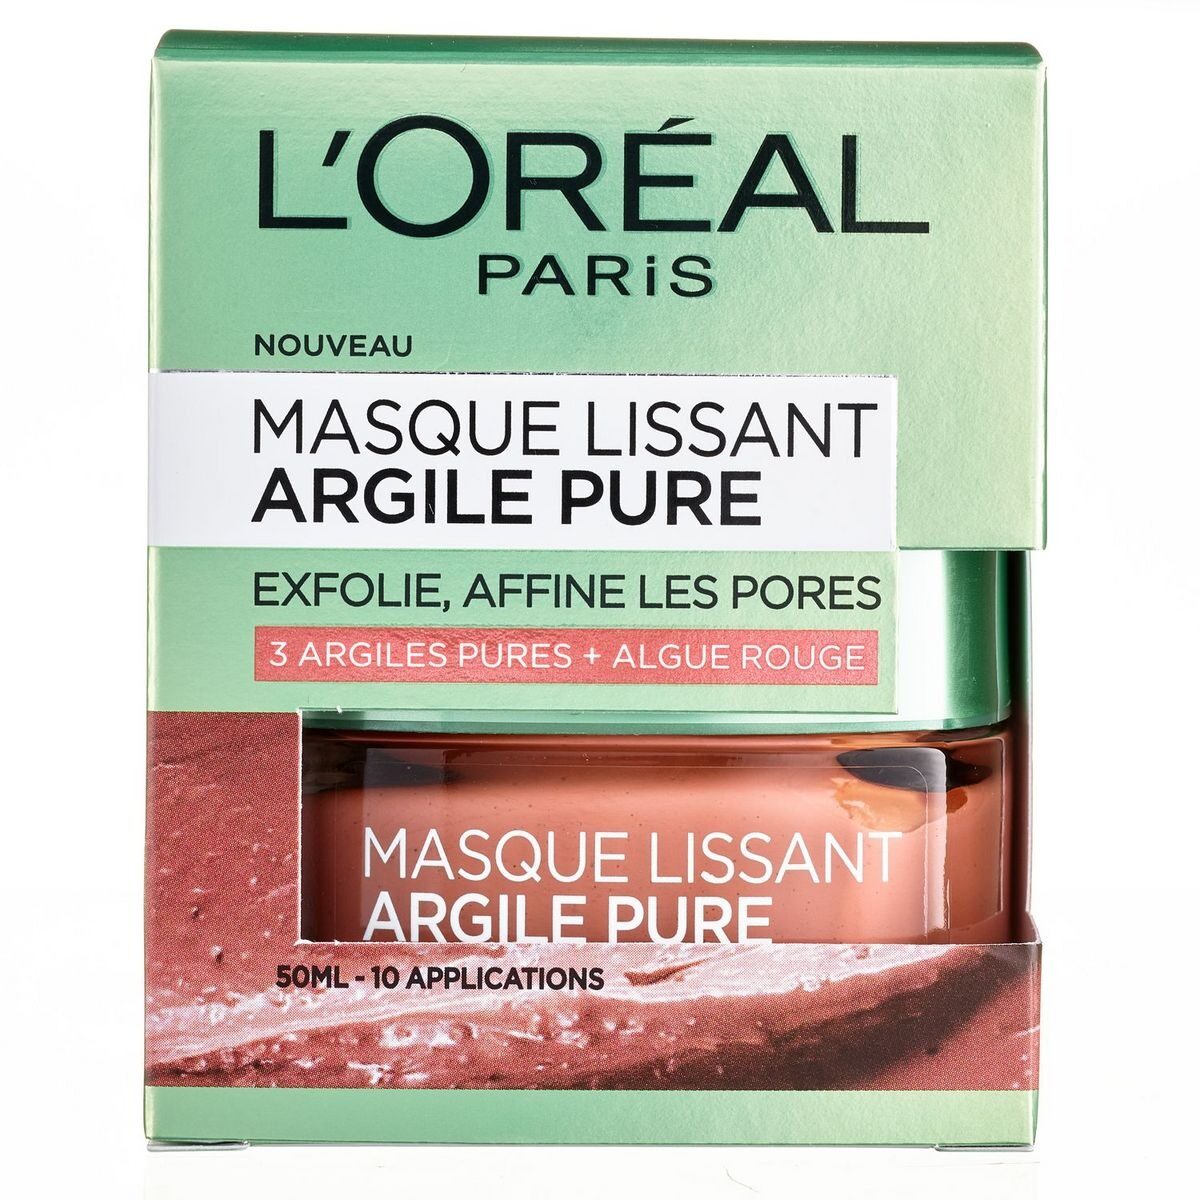 Masque lissant - Tuote - fr